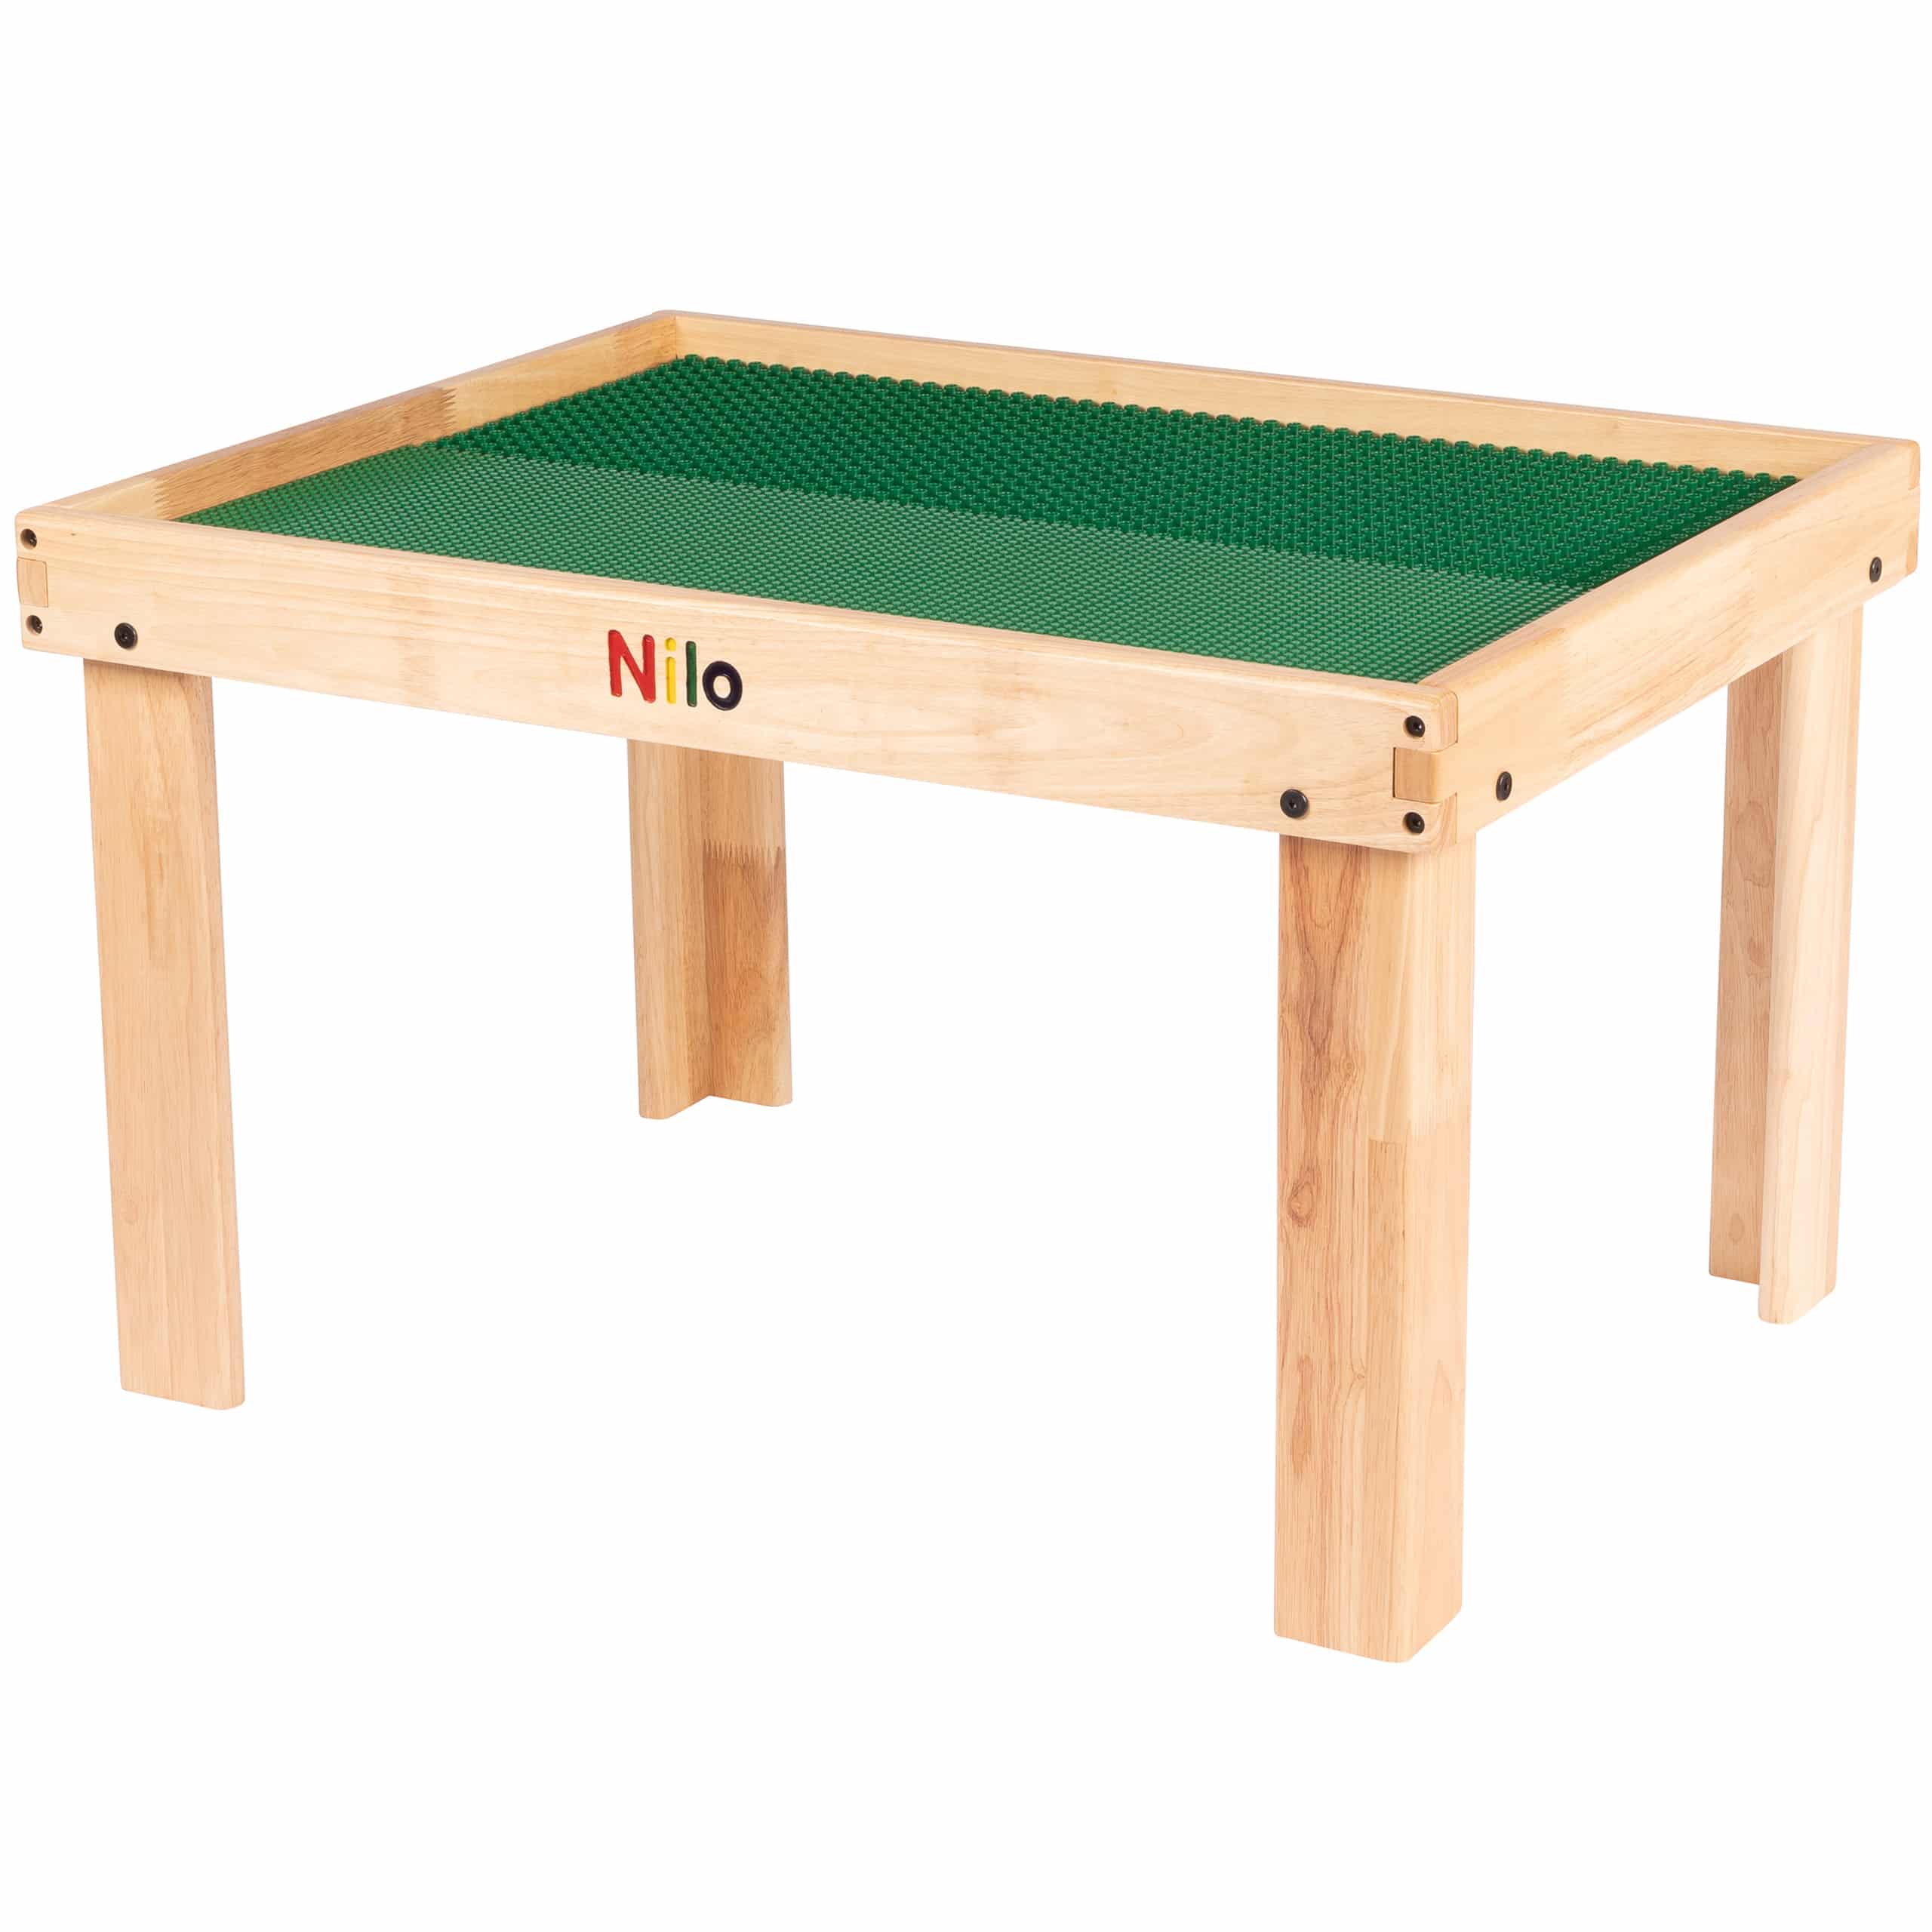 https://www.nilotoys.com/wp-content/uploads/2021/09/small-activity-table-train-table-for-kids-without-holes-green-baseplates.jpg